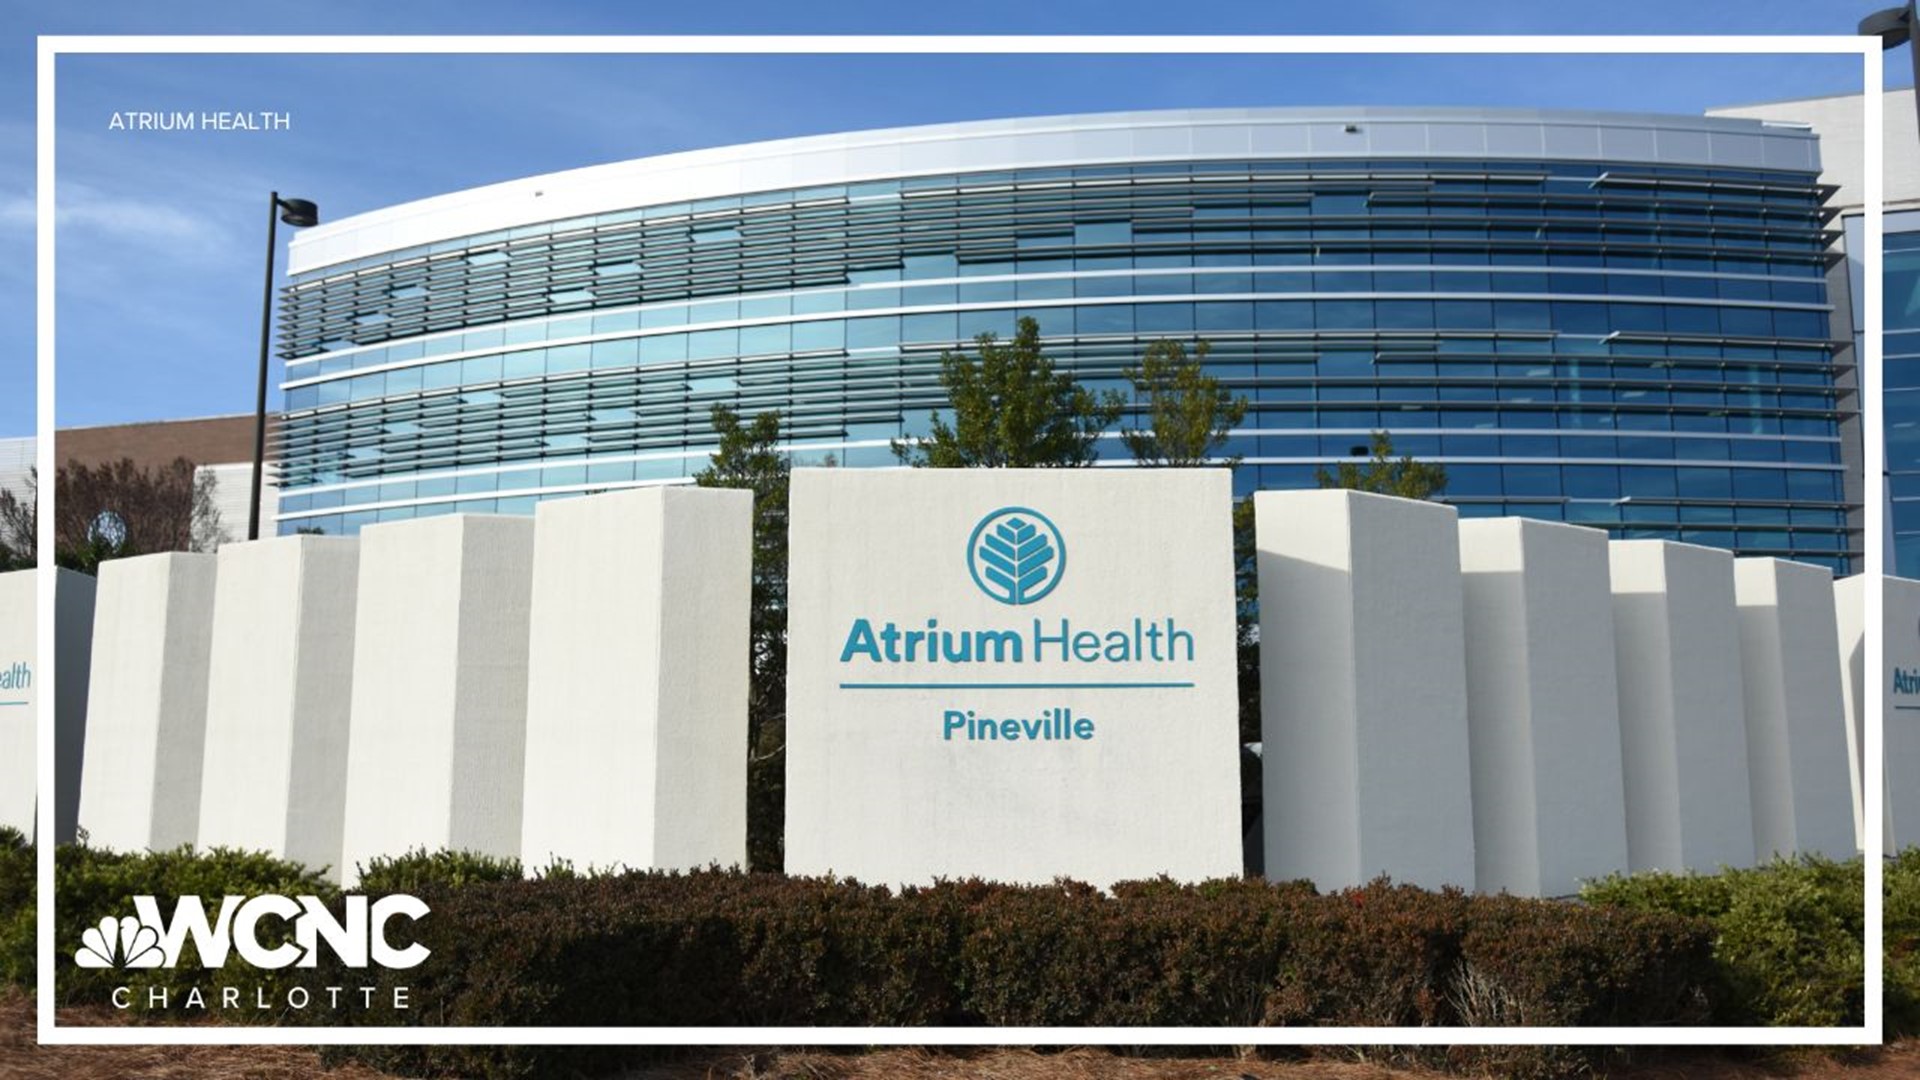 Multiple surgeries were canceled and patients were relocated due to a plumbing leak at Atrium Health Pineville early Thursday, Atrium Health announced.